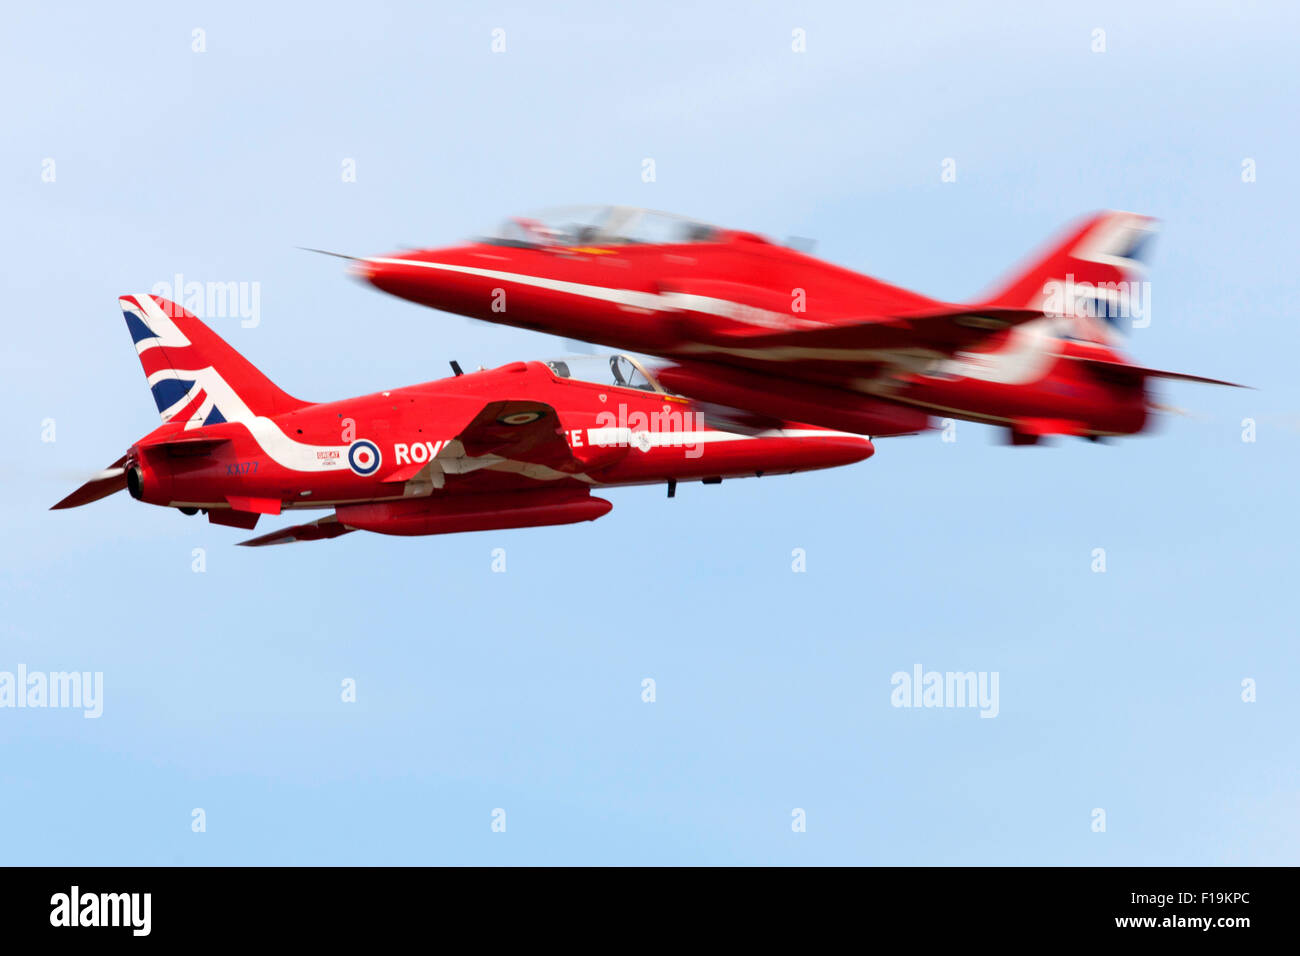 The Red Arrows known as the Royal Air Force Aerobatic Team the aerobatics display team of the Royal Air Force at RIAT 2015 Stock Photo